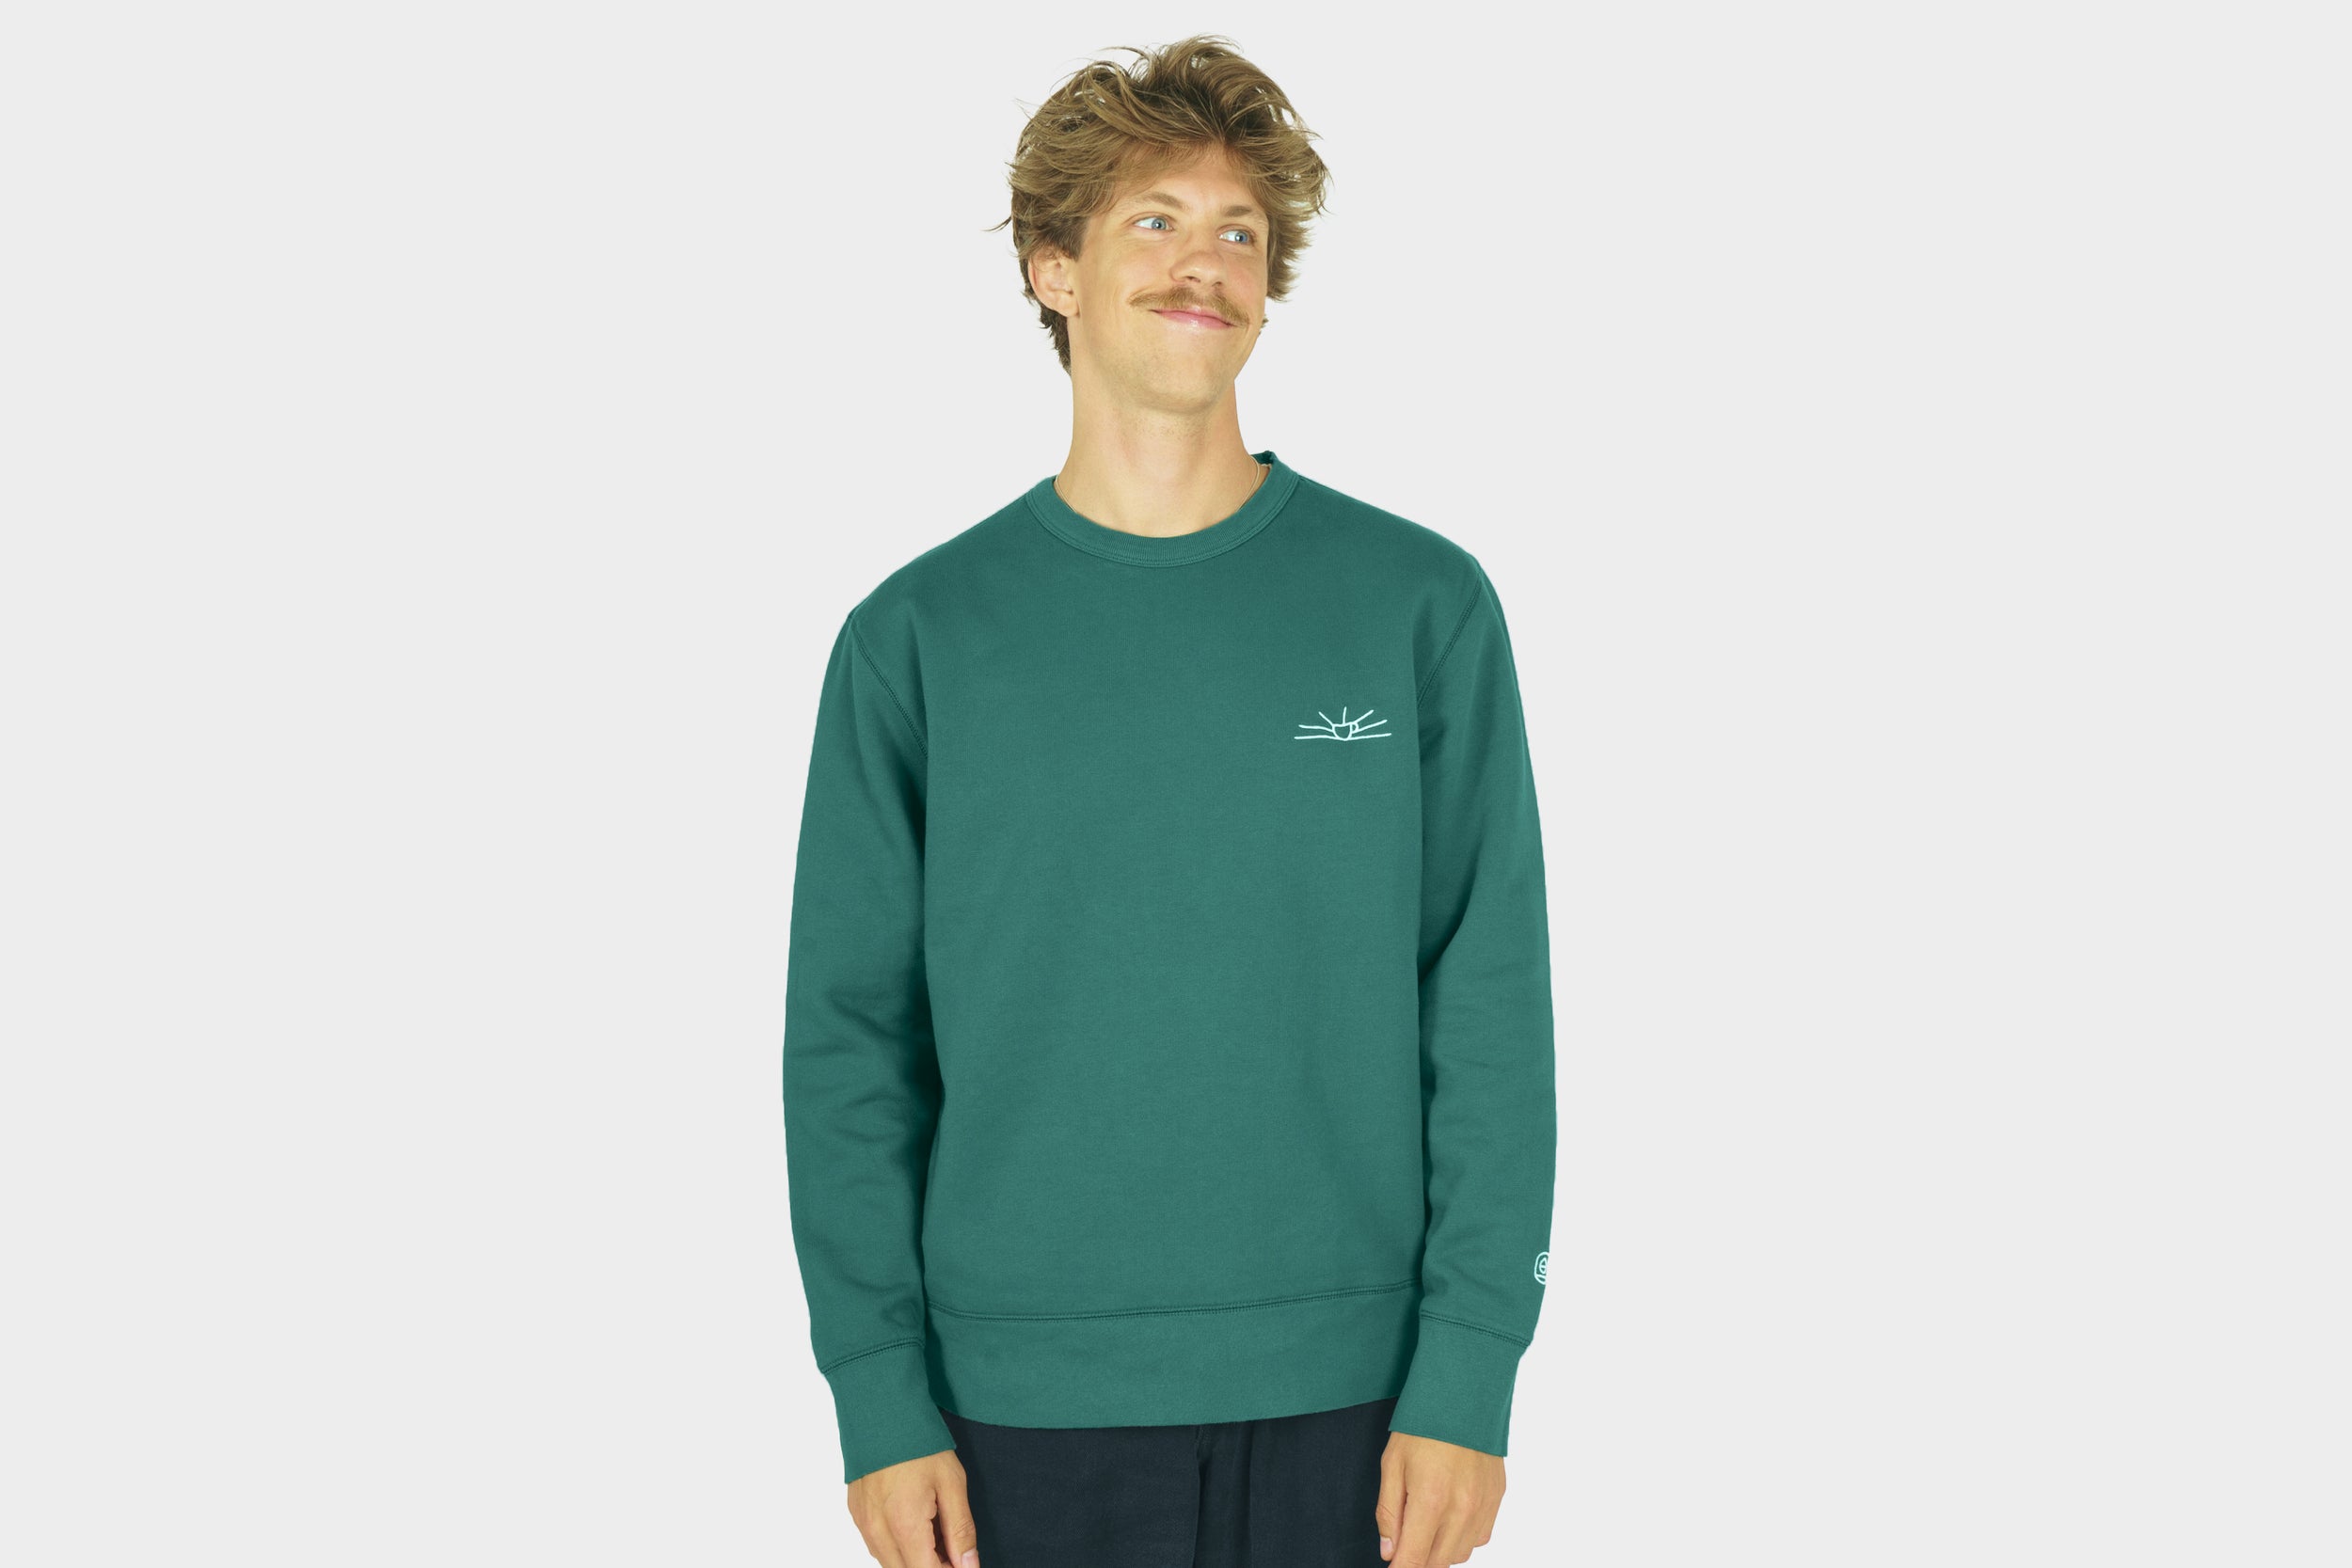 Terra Kaffe | Man wearing a dark green sweater with a small sunshine design in the top right corner